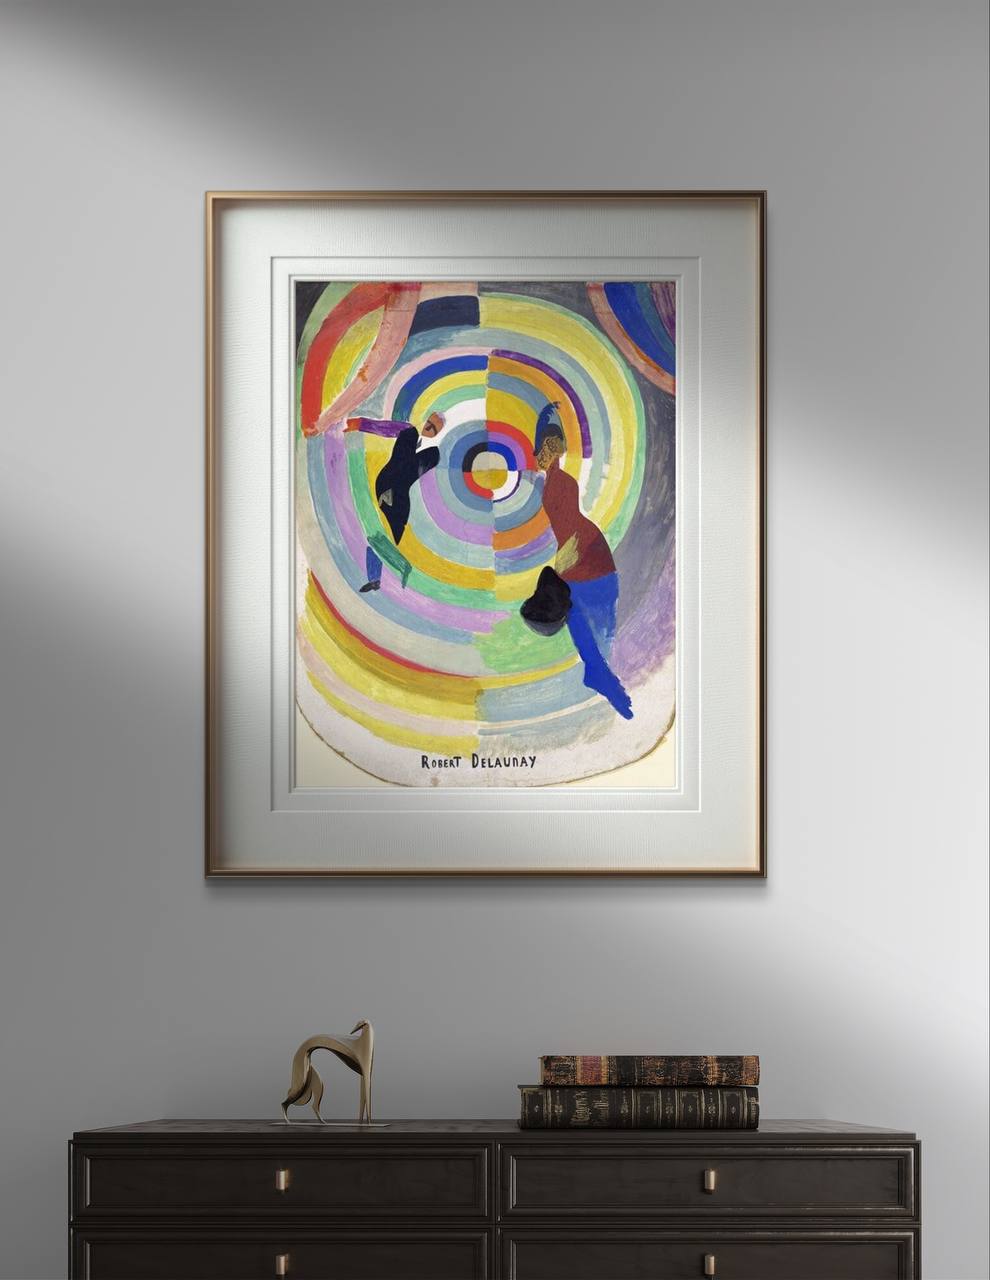 A framed poster print of "Political Drama" by Robert Delaunay displayed in a modern living space. The artwork showcases two abstract figures in motion against a backdrop of swirling concentric circles, using bold and vibrant colors. This art reproduction brings a contemporary and energetic vibe to any room, making it a perfect addition to your home decor. Keywords: Wall Art, home decor, painting, art reproduction, famous artist, Poster, print, Robert Delaunay, Political Drama.